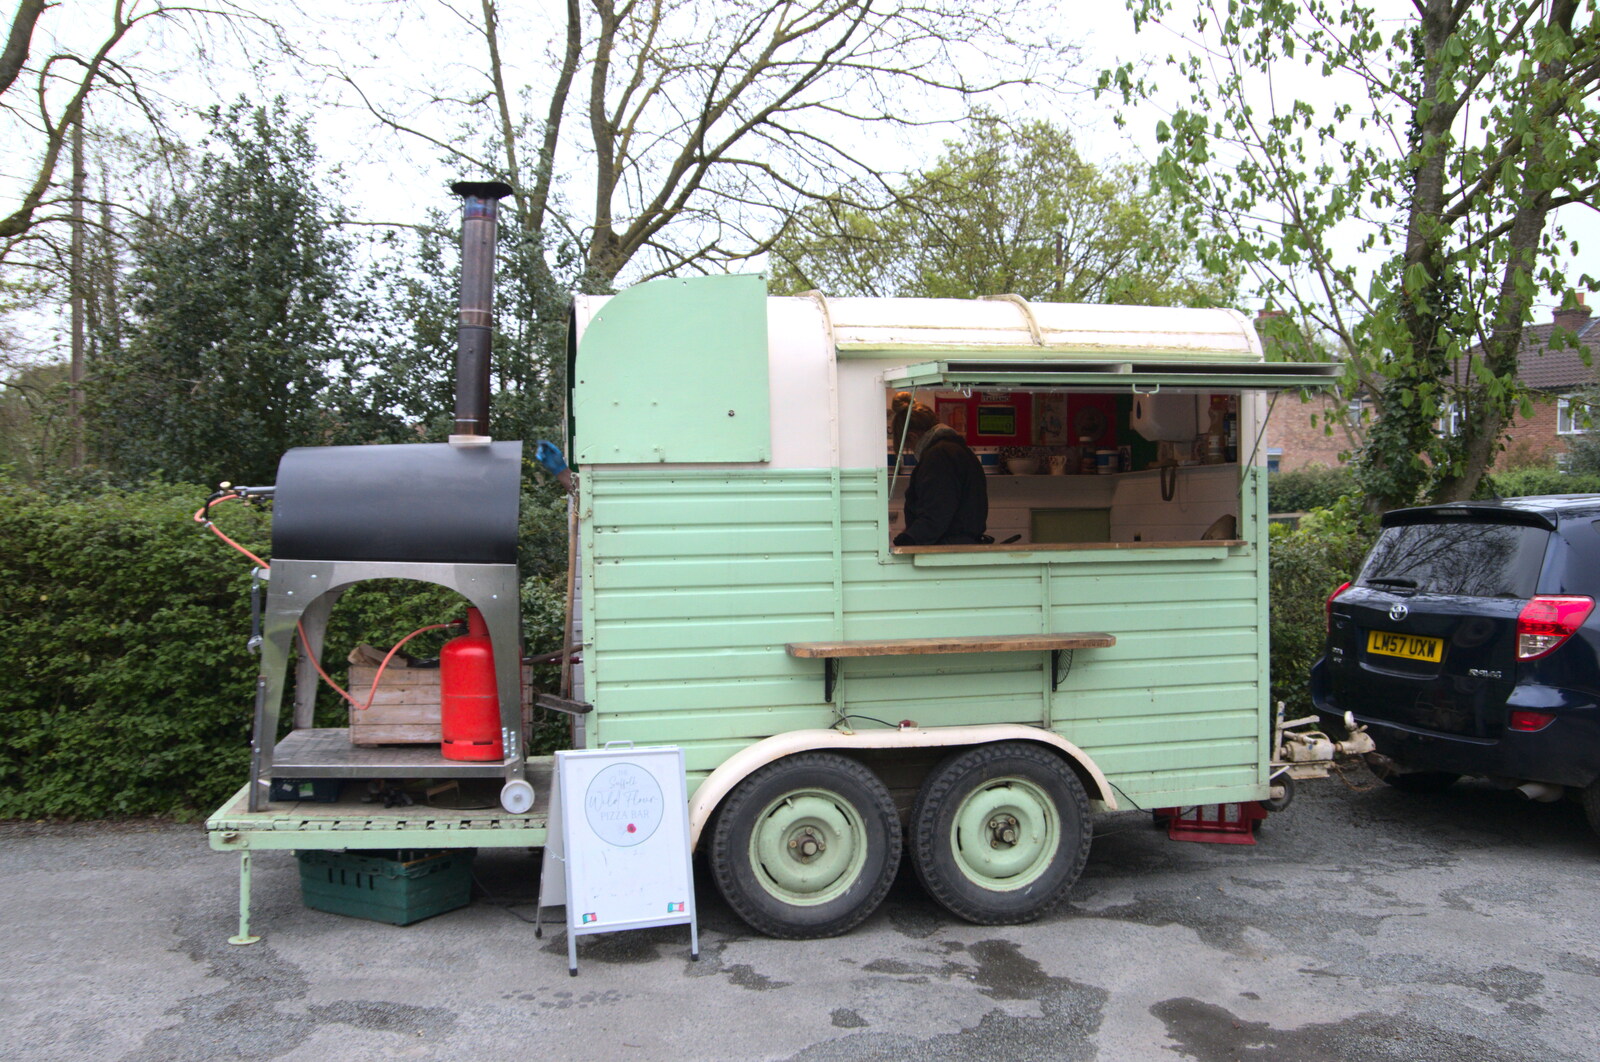 The Wild Flour van is doing our pizzas  from Pizza at the Village Hall, Brome, Suffolk - 30th April 2023